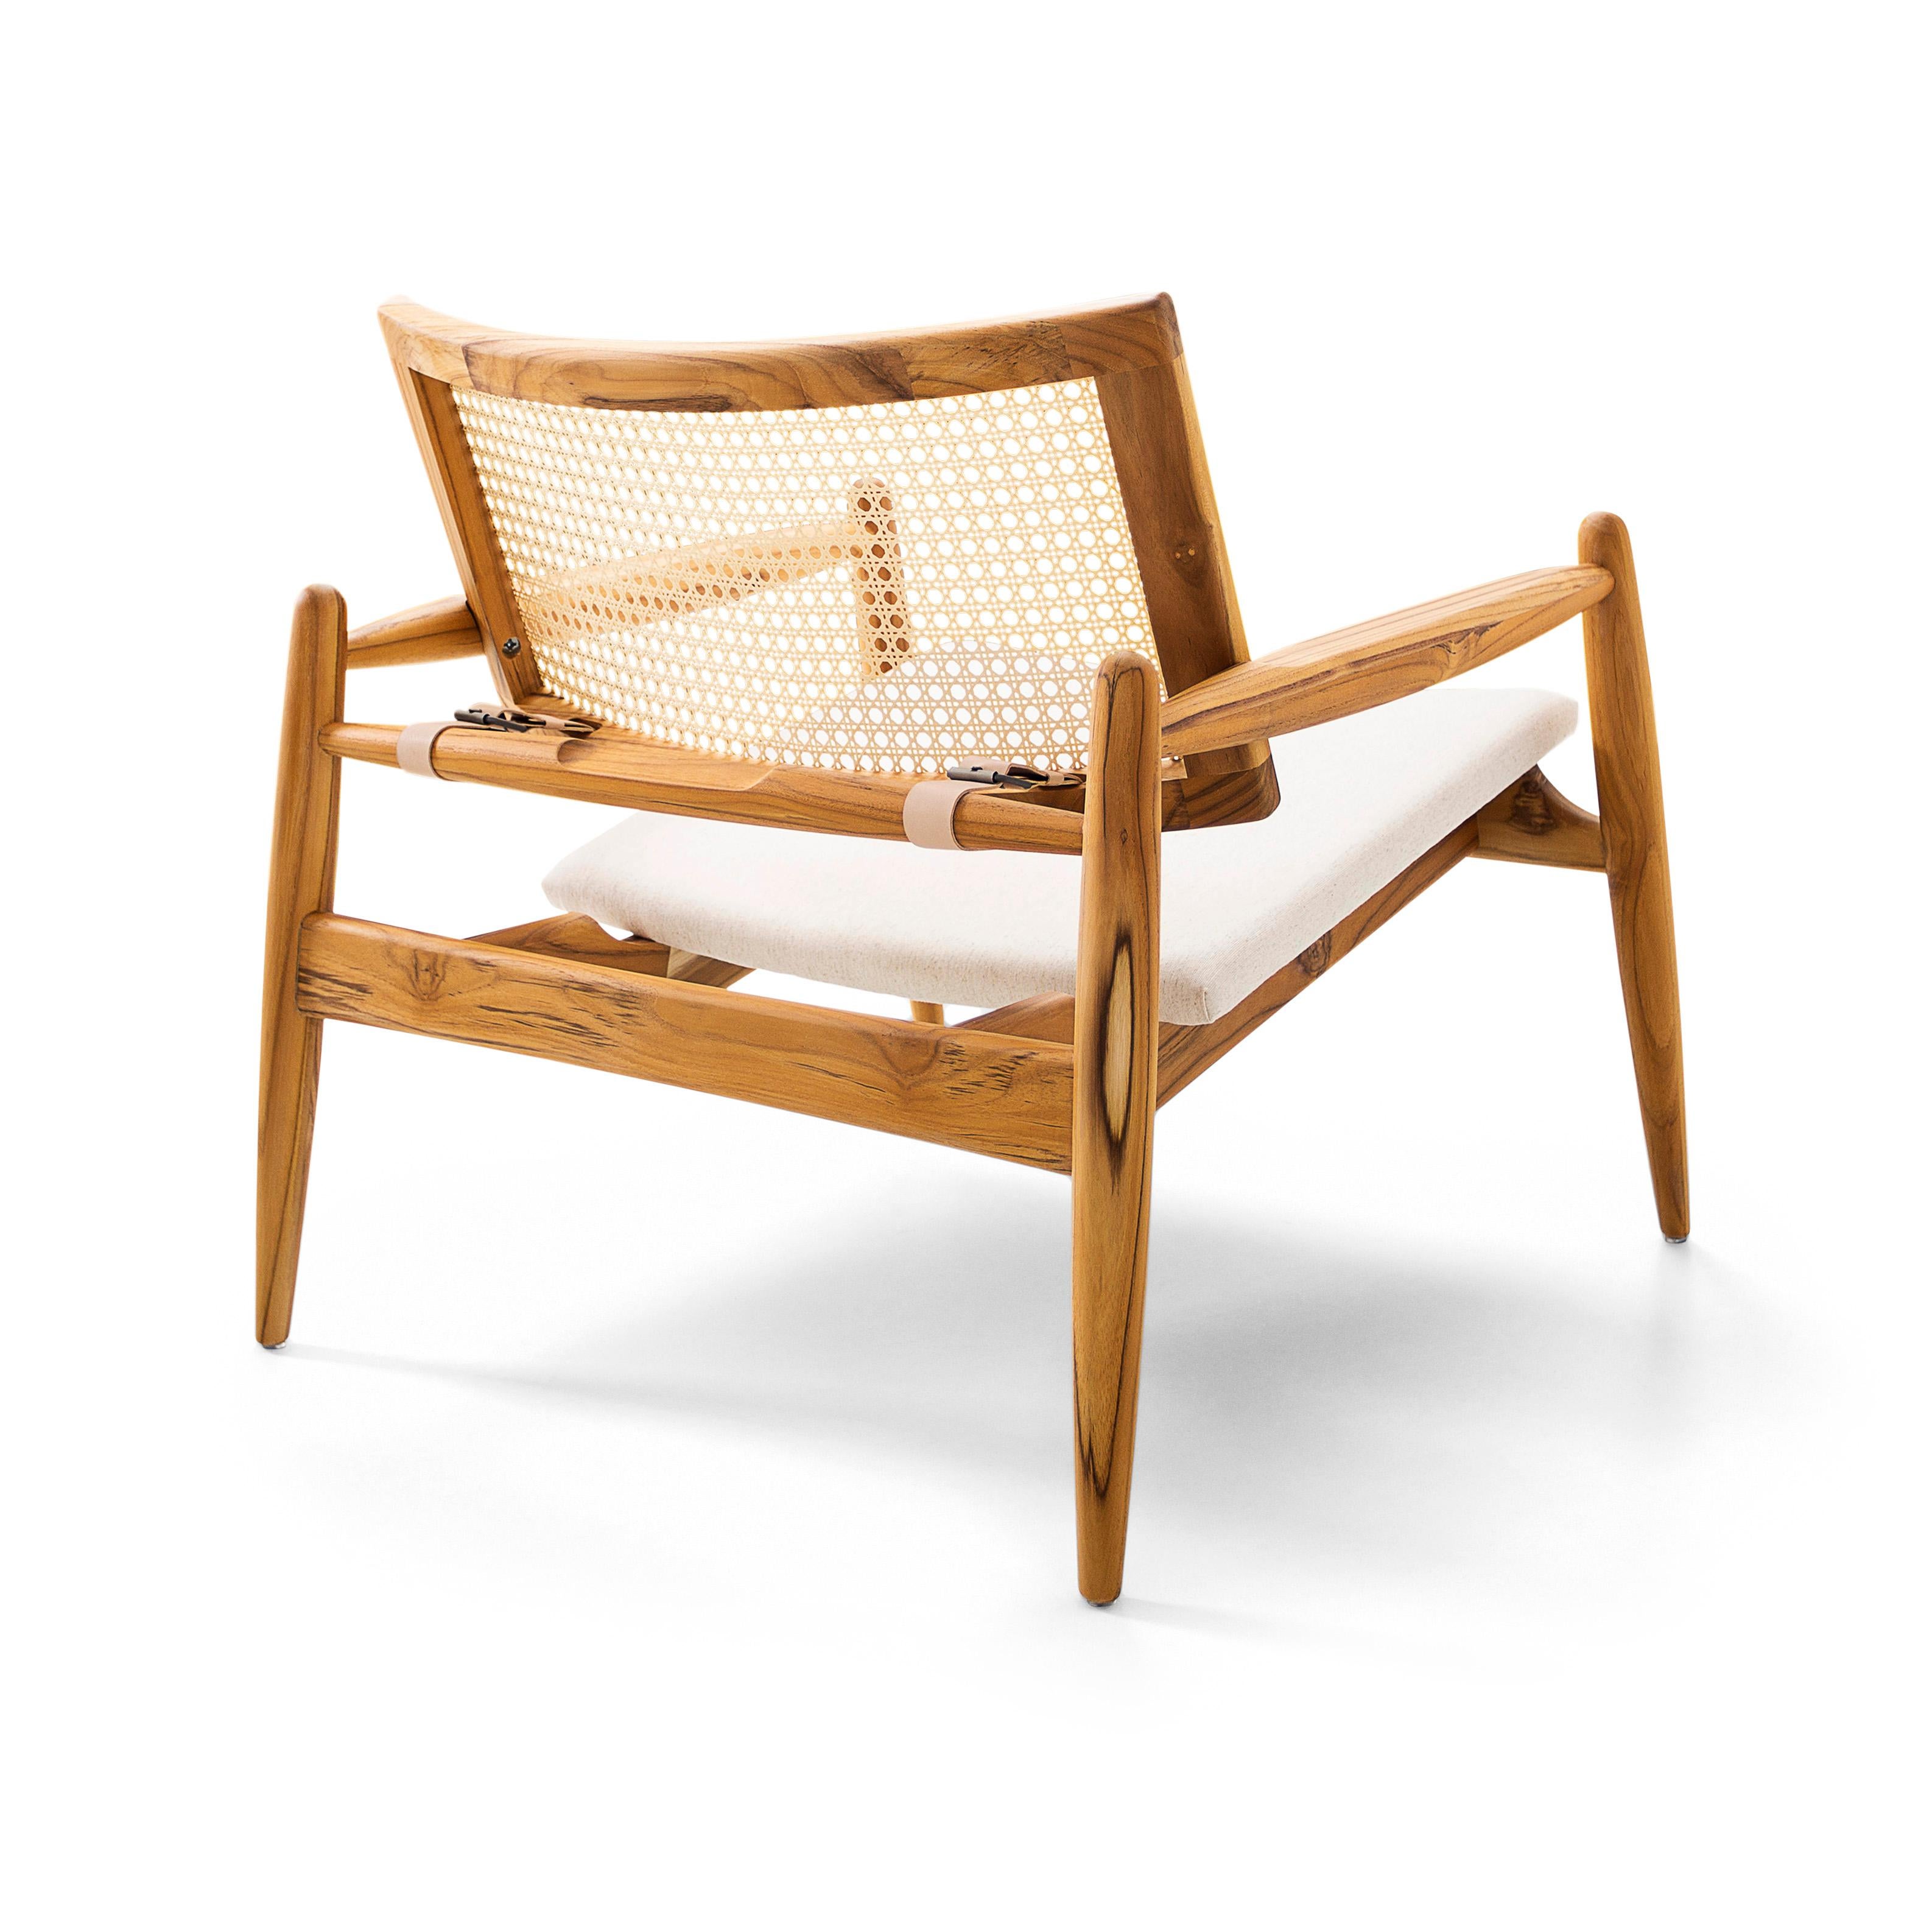 The Soho features a slightly declined seat and incorporates great shaping in the cane back and spindle legs. Please do not overlook the belt buckle supports in the back of this beautiful chair!

In stock!!!